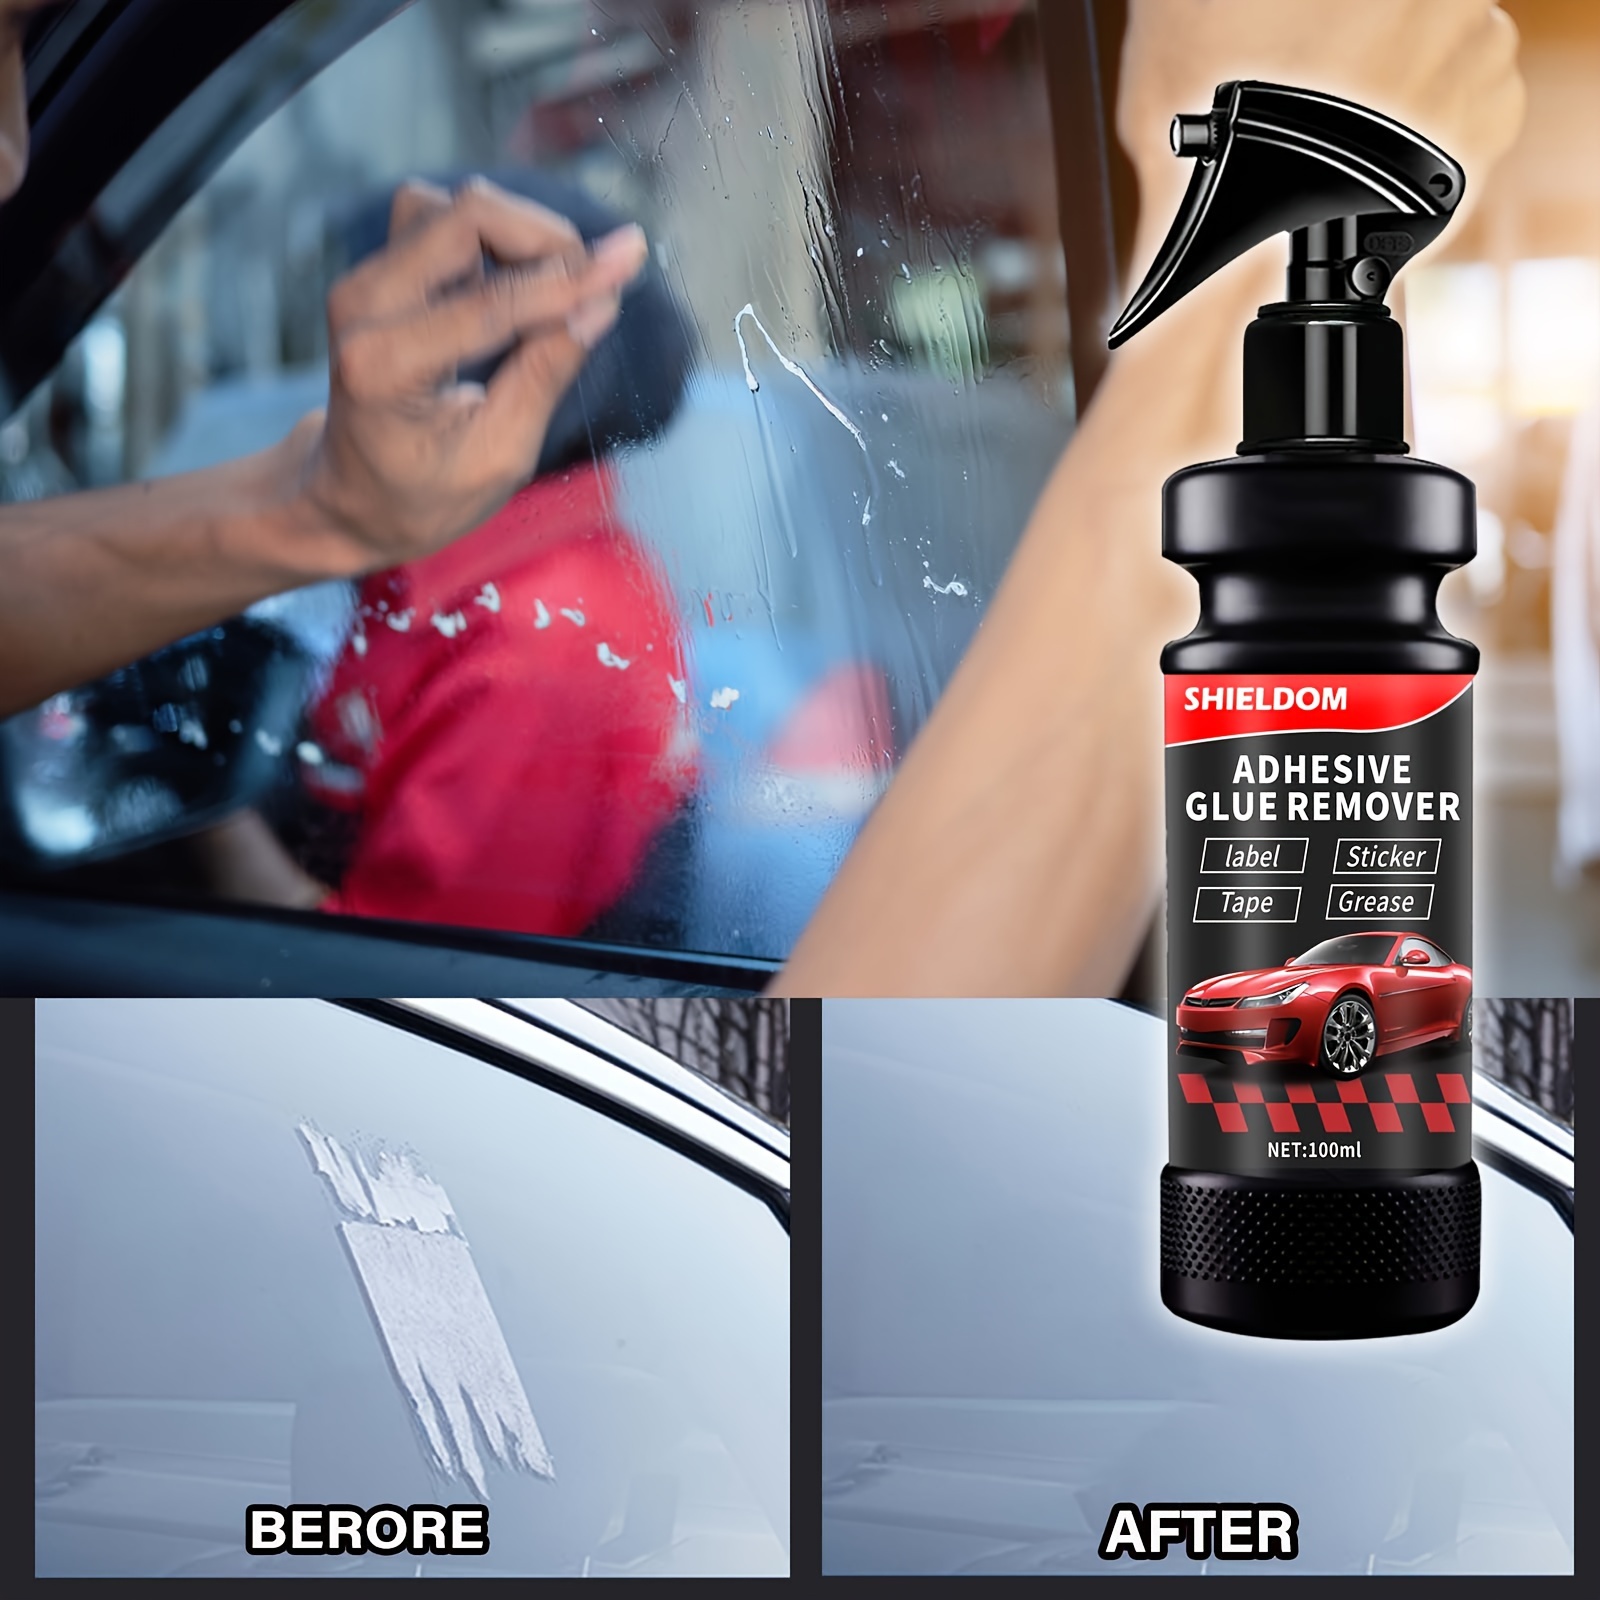 Car Sticker Remover, Effective Household Car Sticky Residue Remover 1.01oz  Multifunctional Car Adhesive Remover For Spots, Stains, Marks